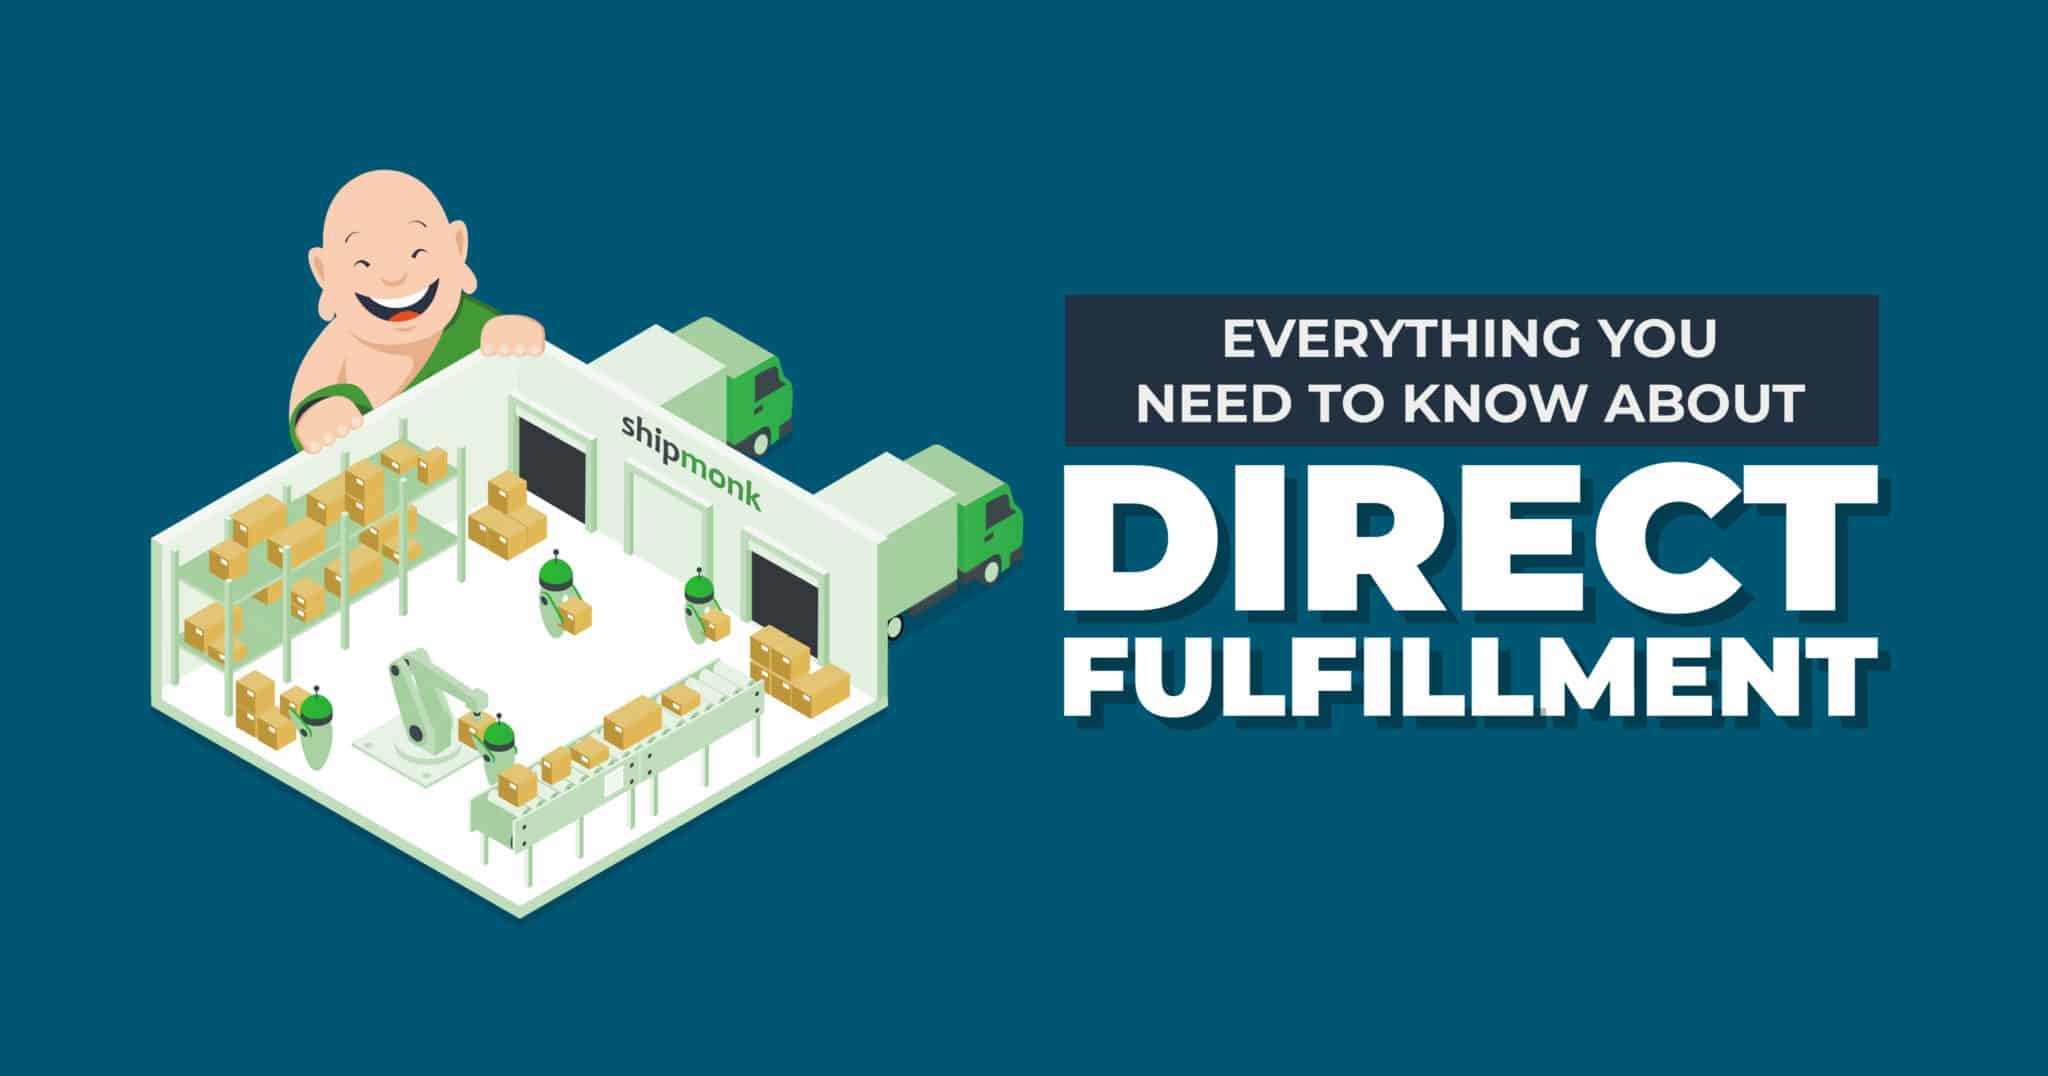 Everything You Need to Know About Direct Fulfillment